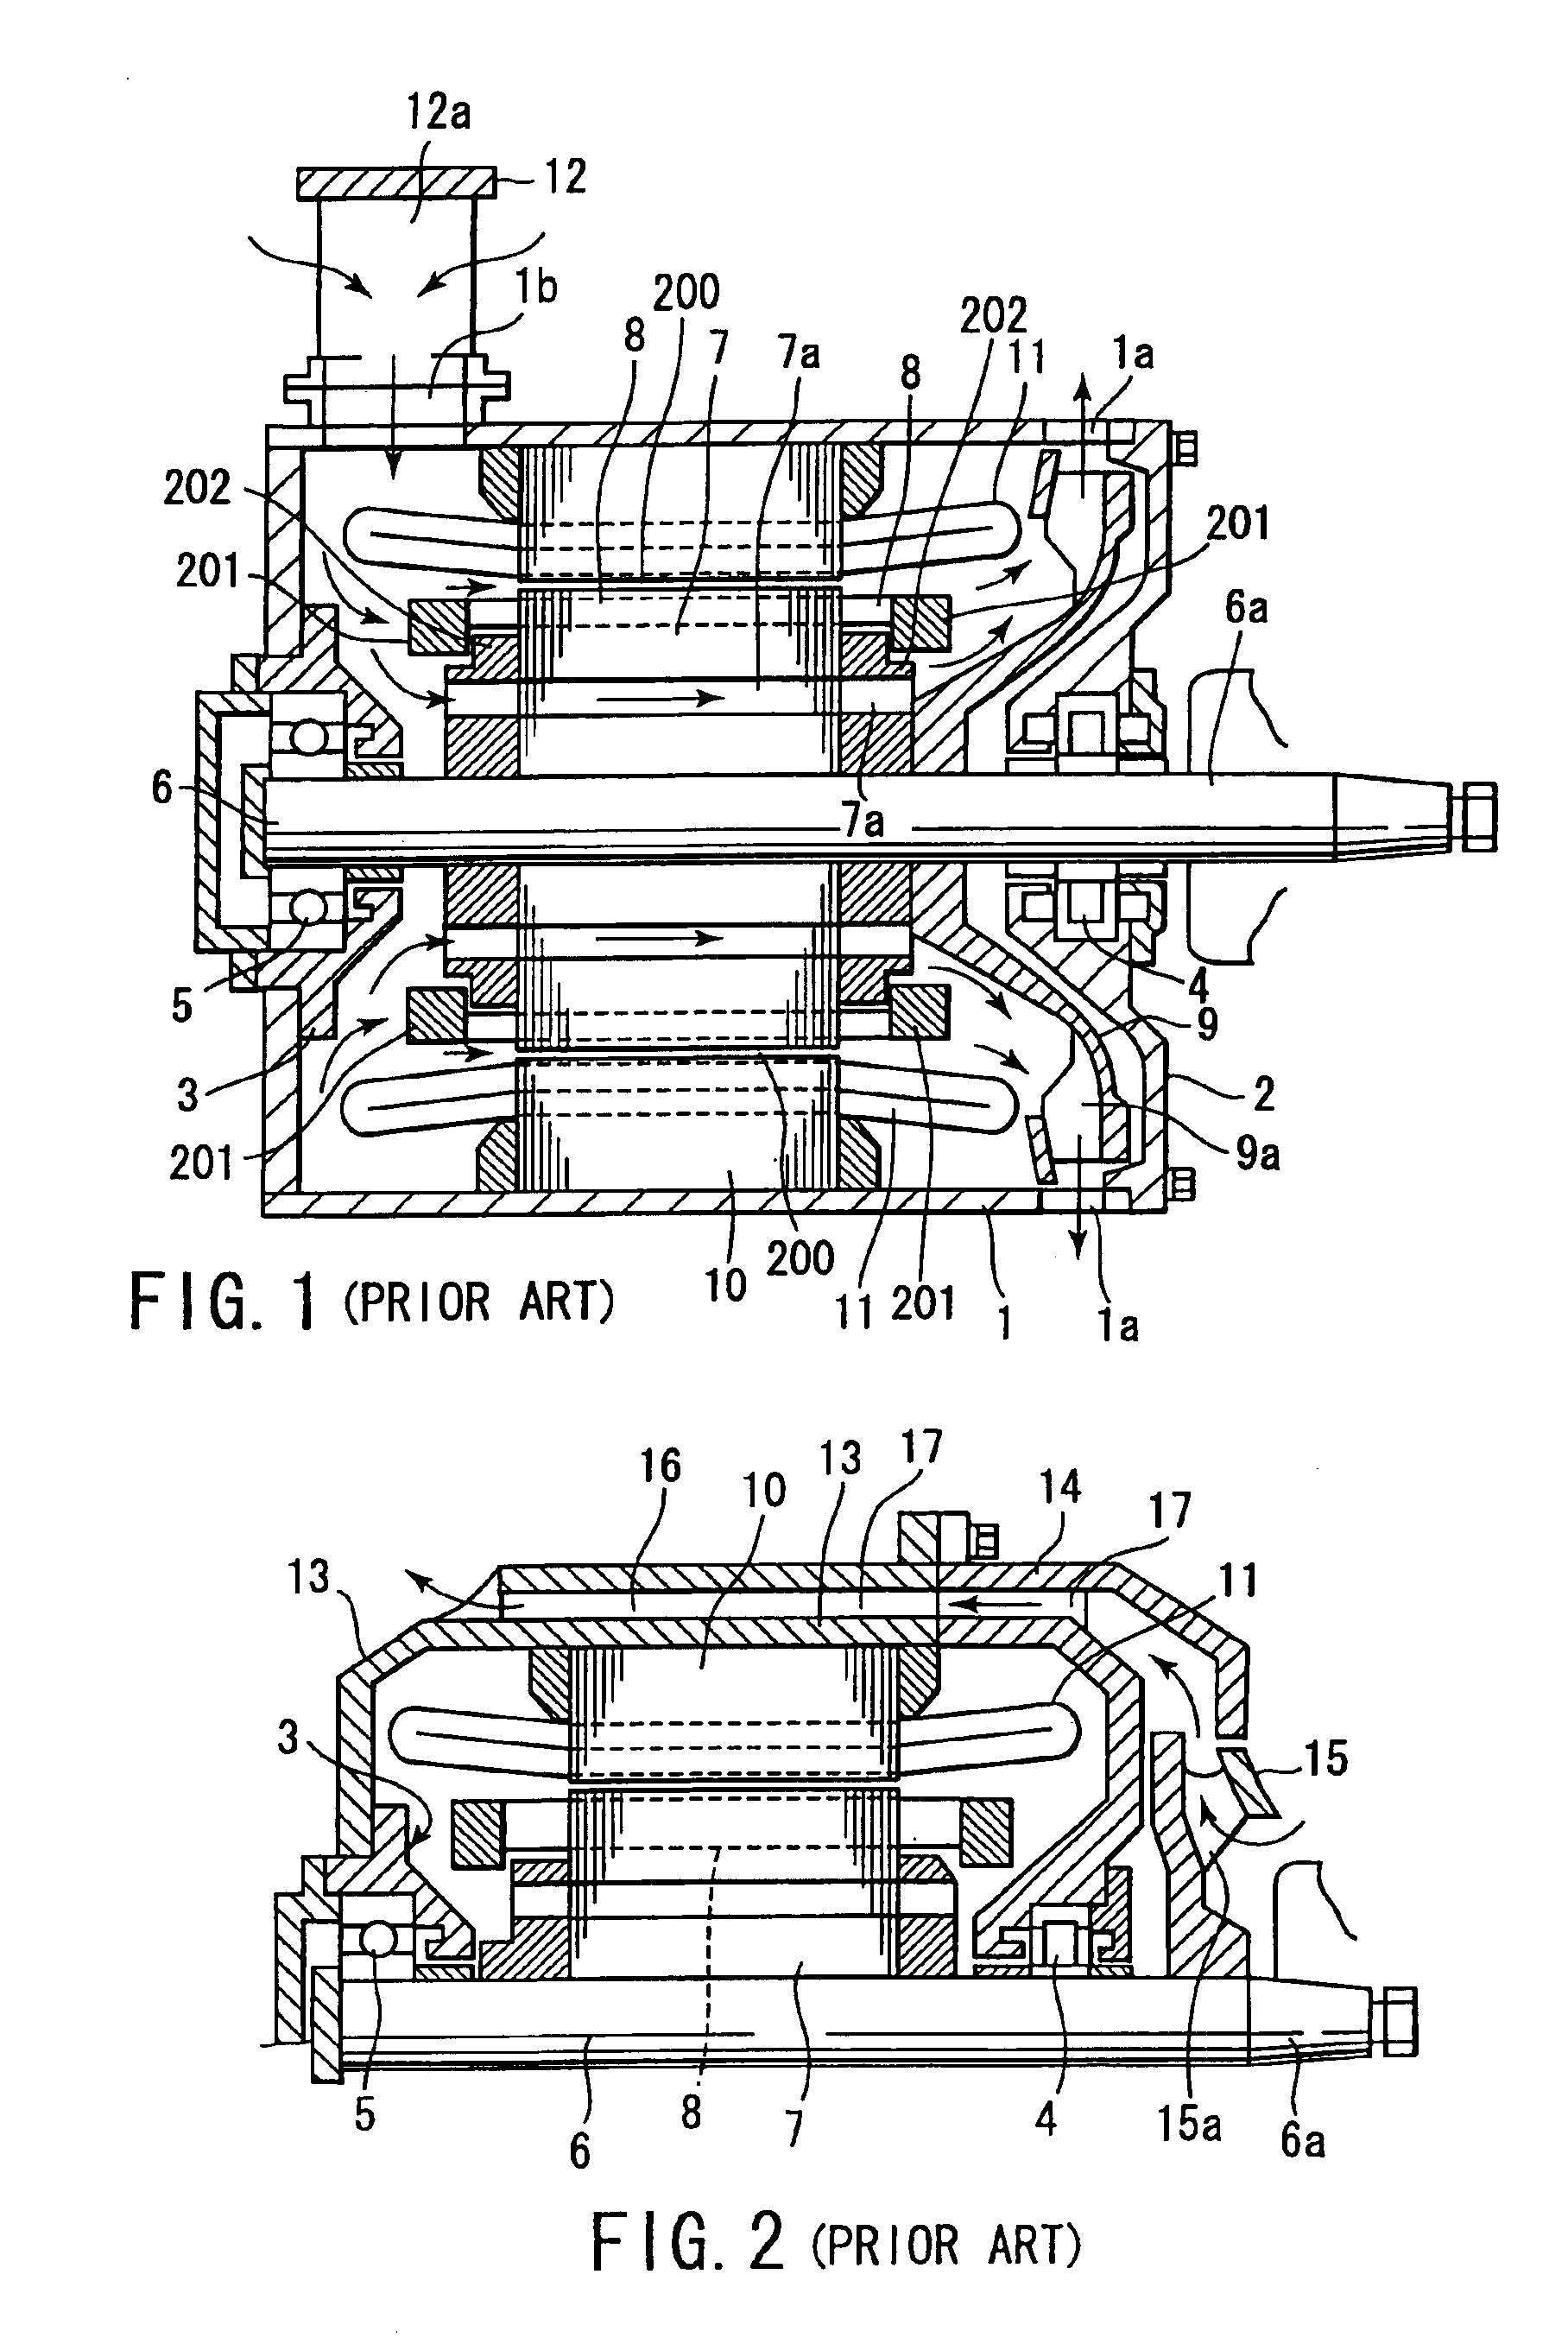 Fully enclosed type motor with outer fans